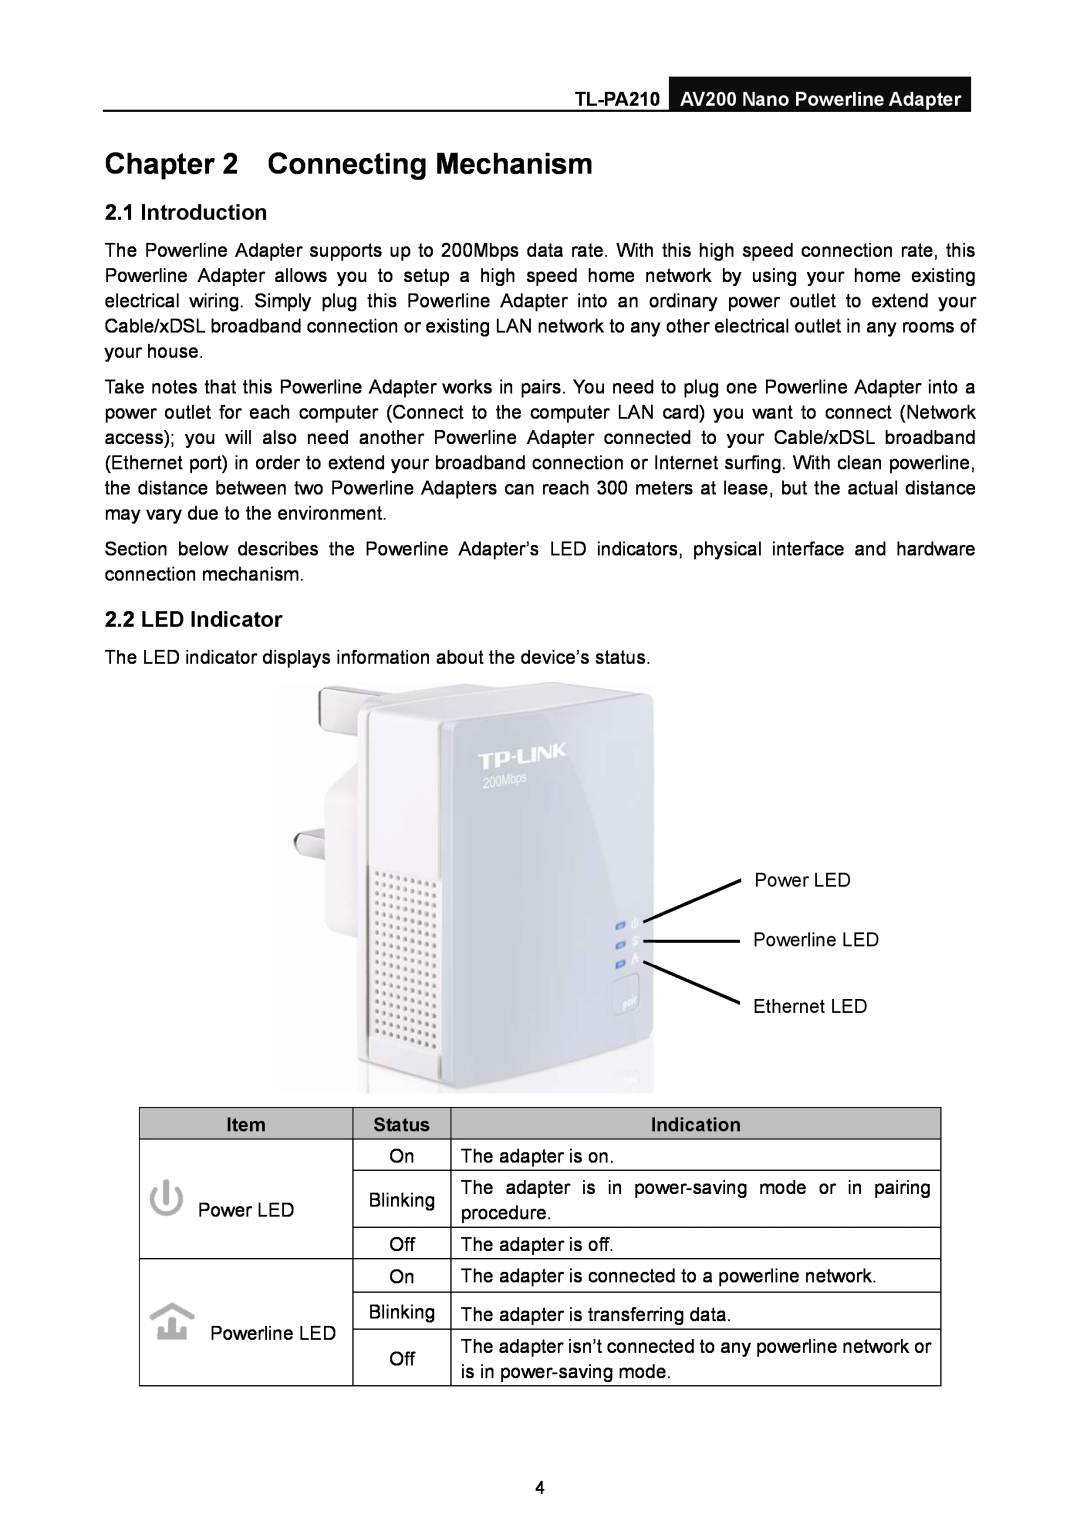 TP-Link TL-PA210 manual Connecting Mechanism, Introduction, LED Indicator, Status, Indication 